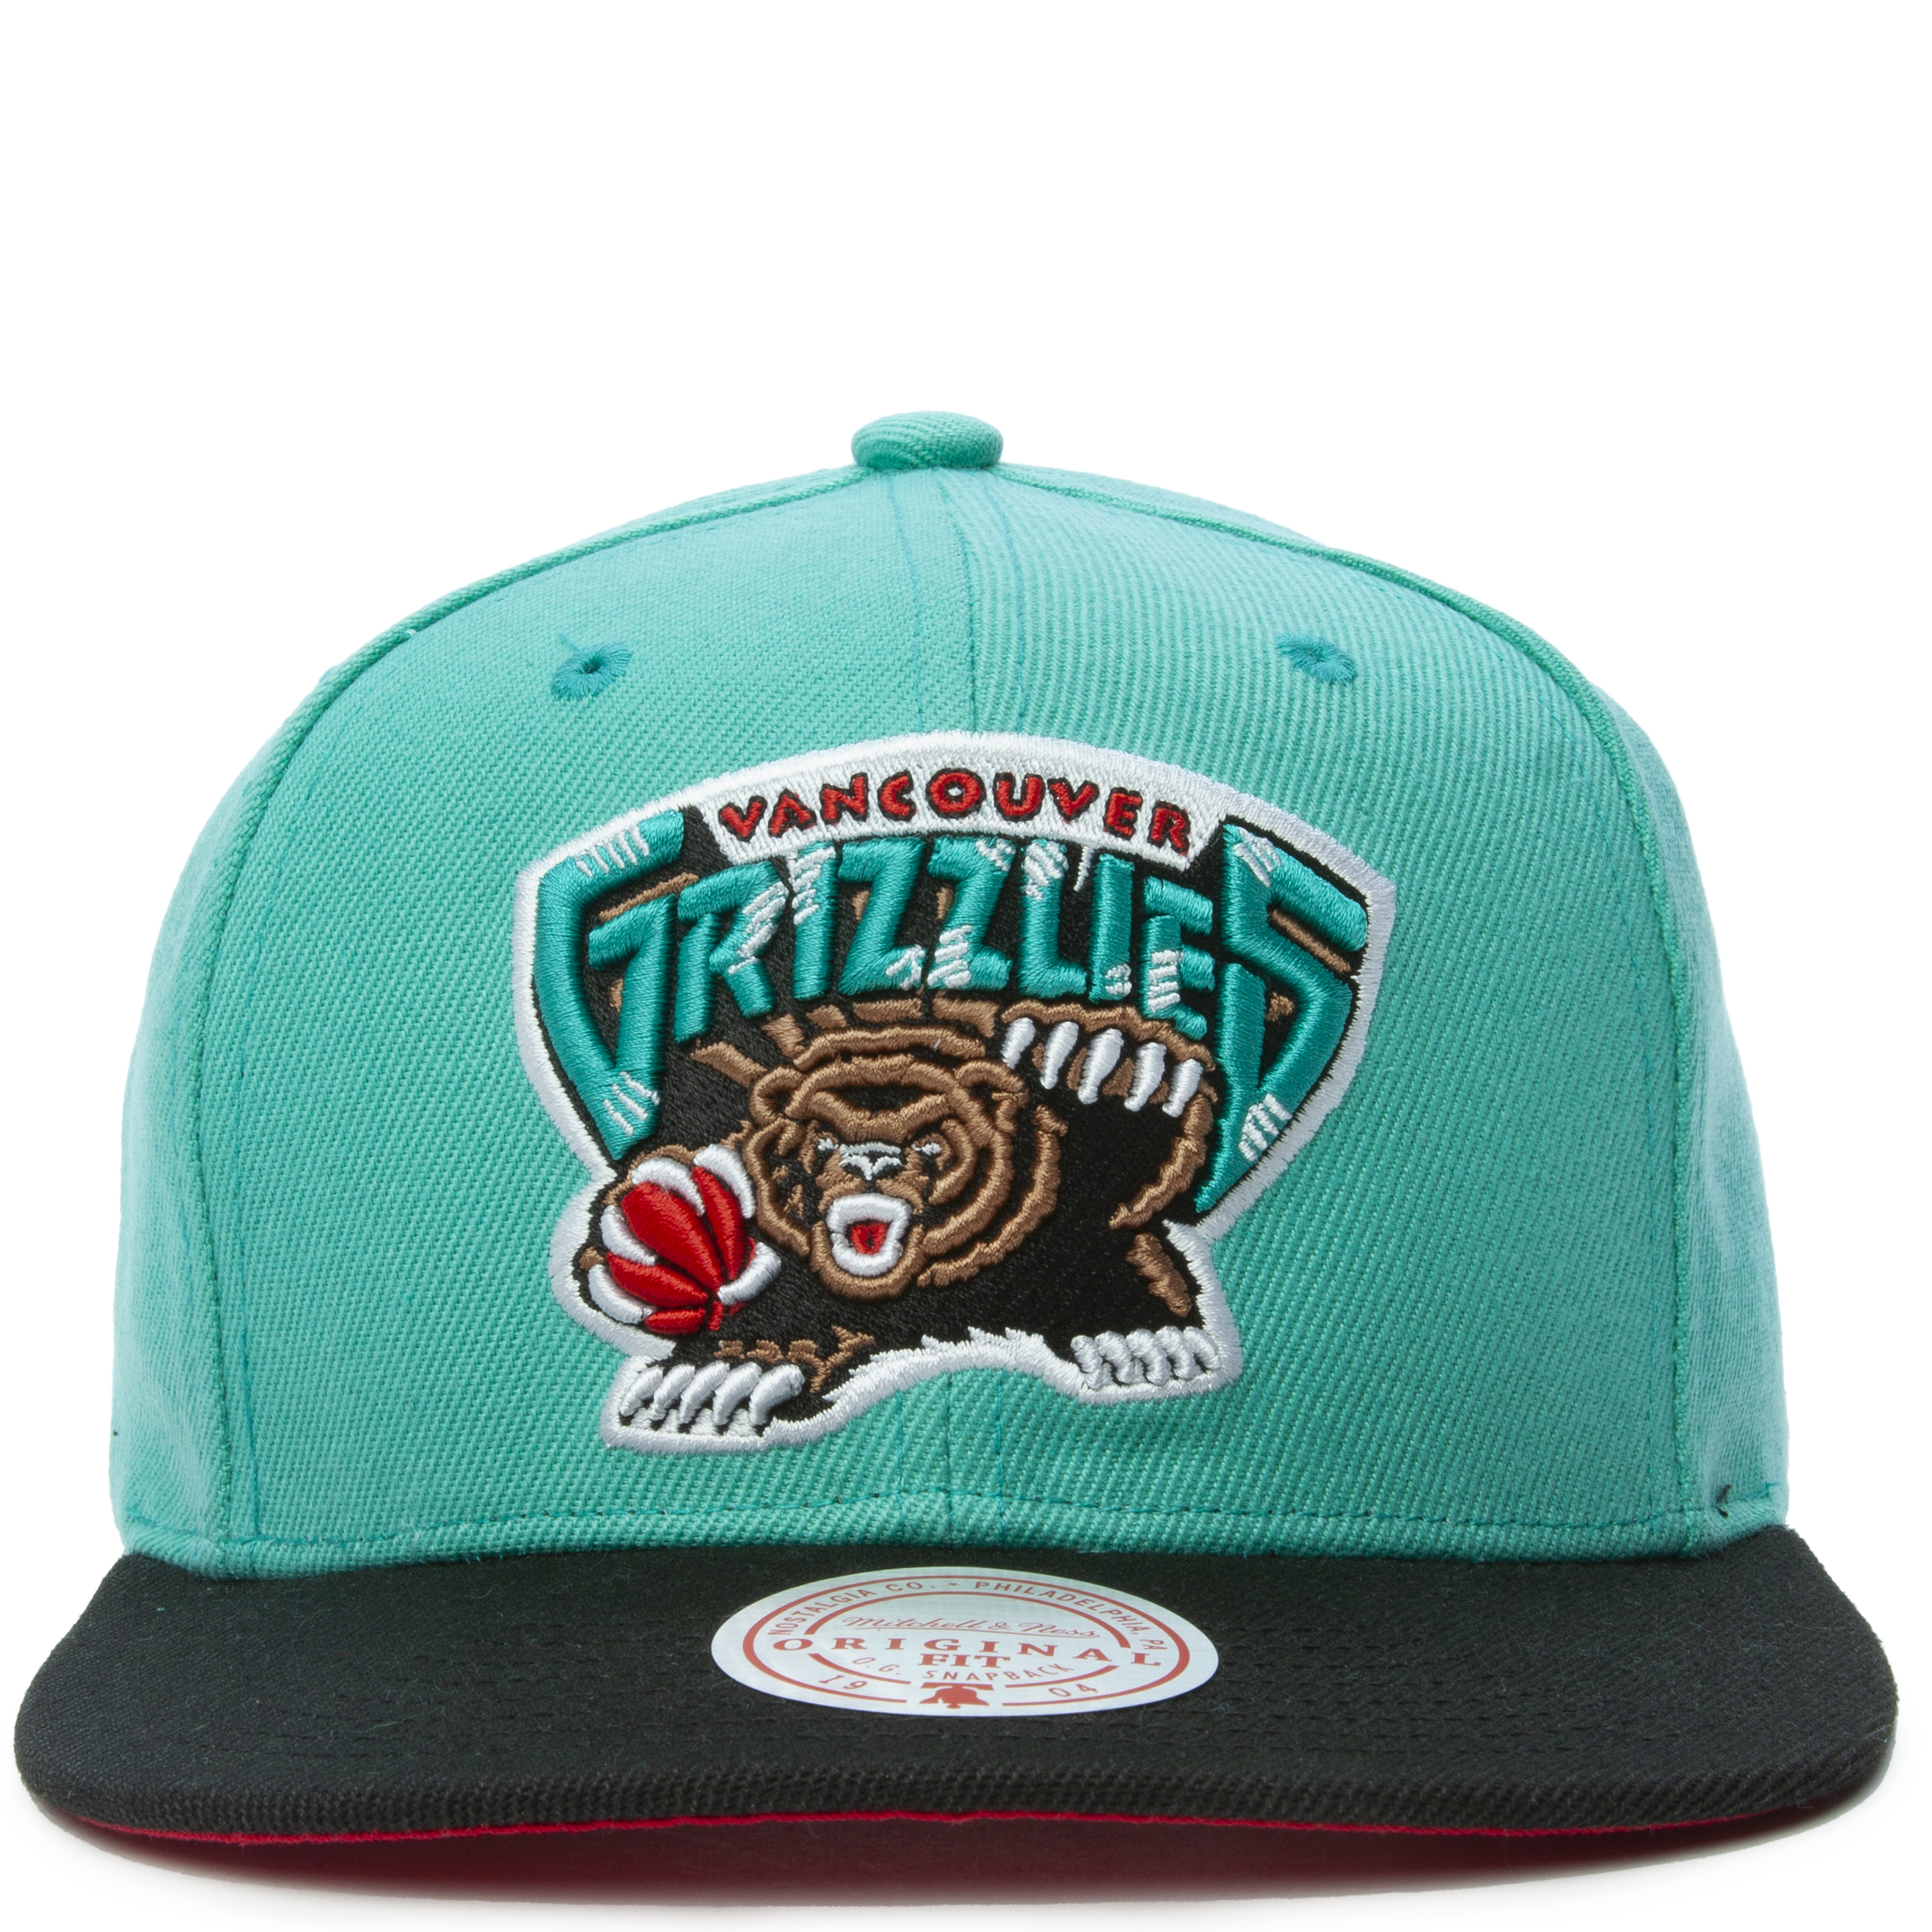 Official Memphis Grizzlies Hats, Snapbacks, Fitted Hats, Beanies